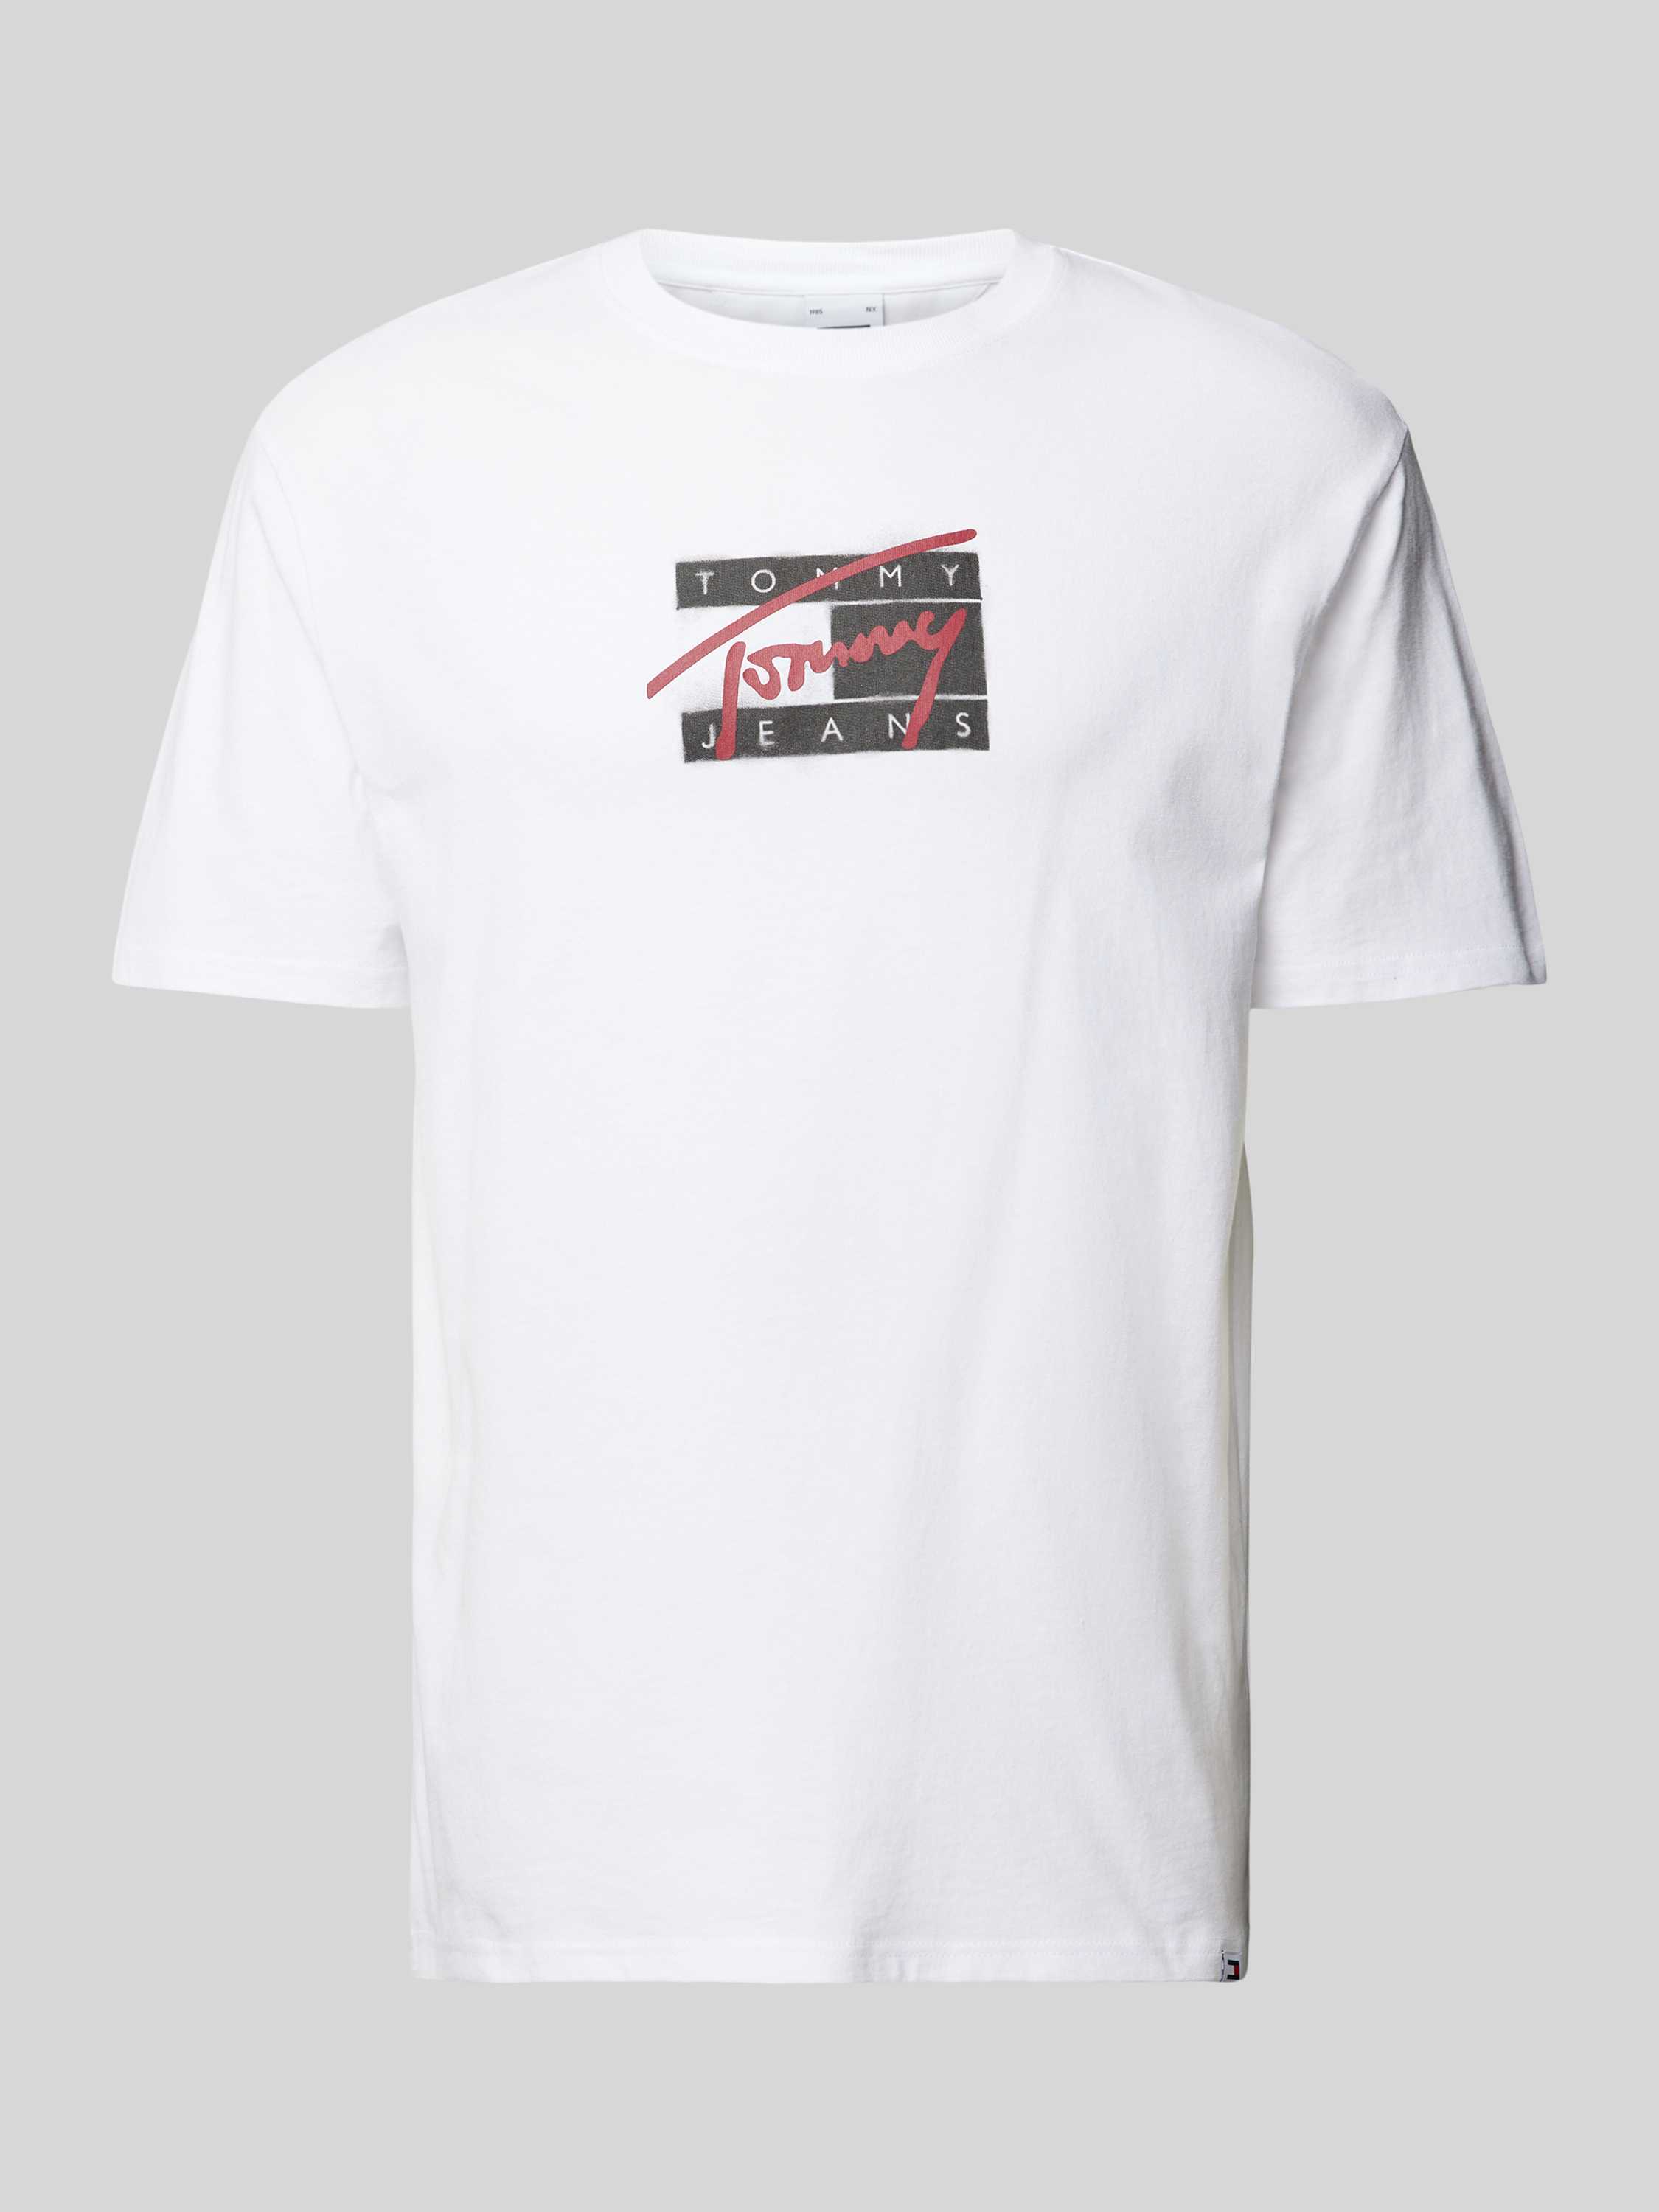 Tommy Jeans Street Sign T-Shirt Herfst Winter Collectie White Heren